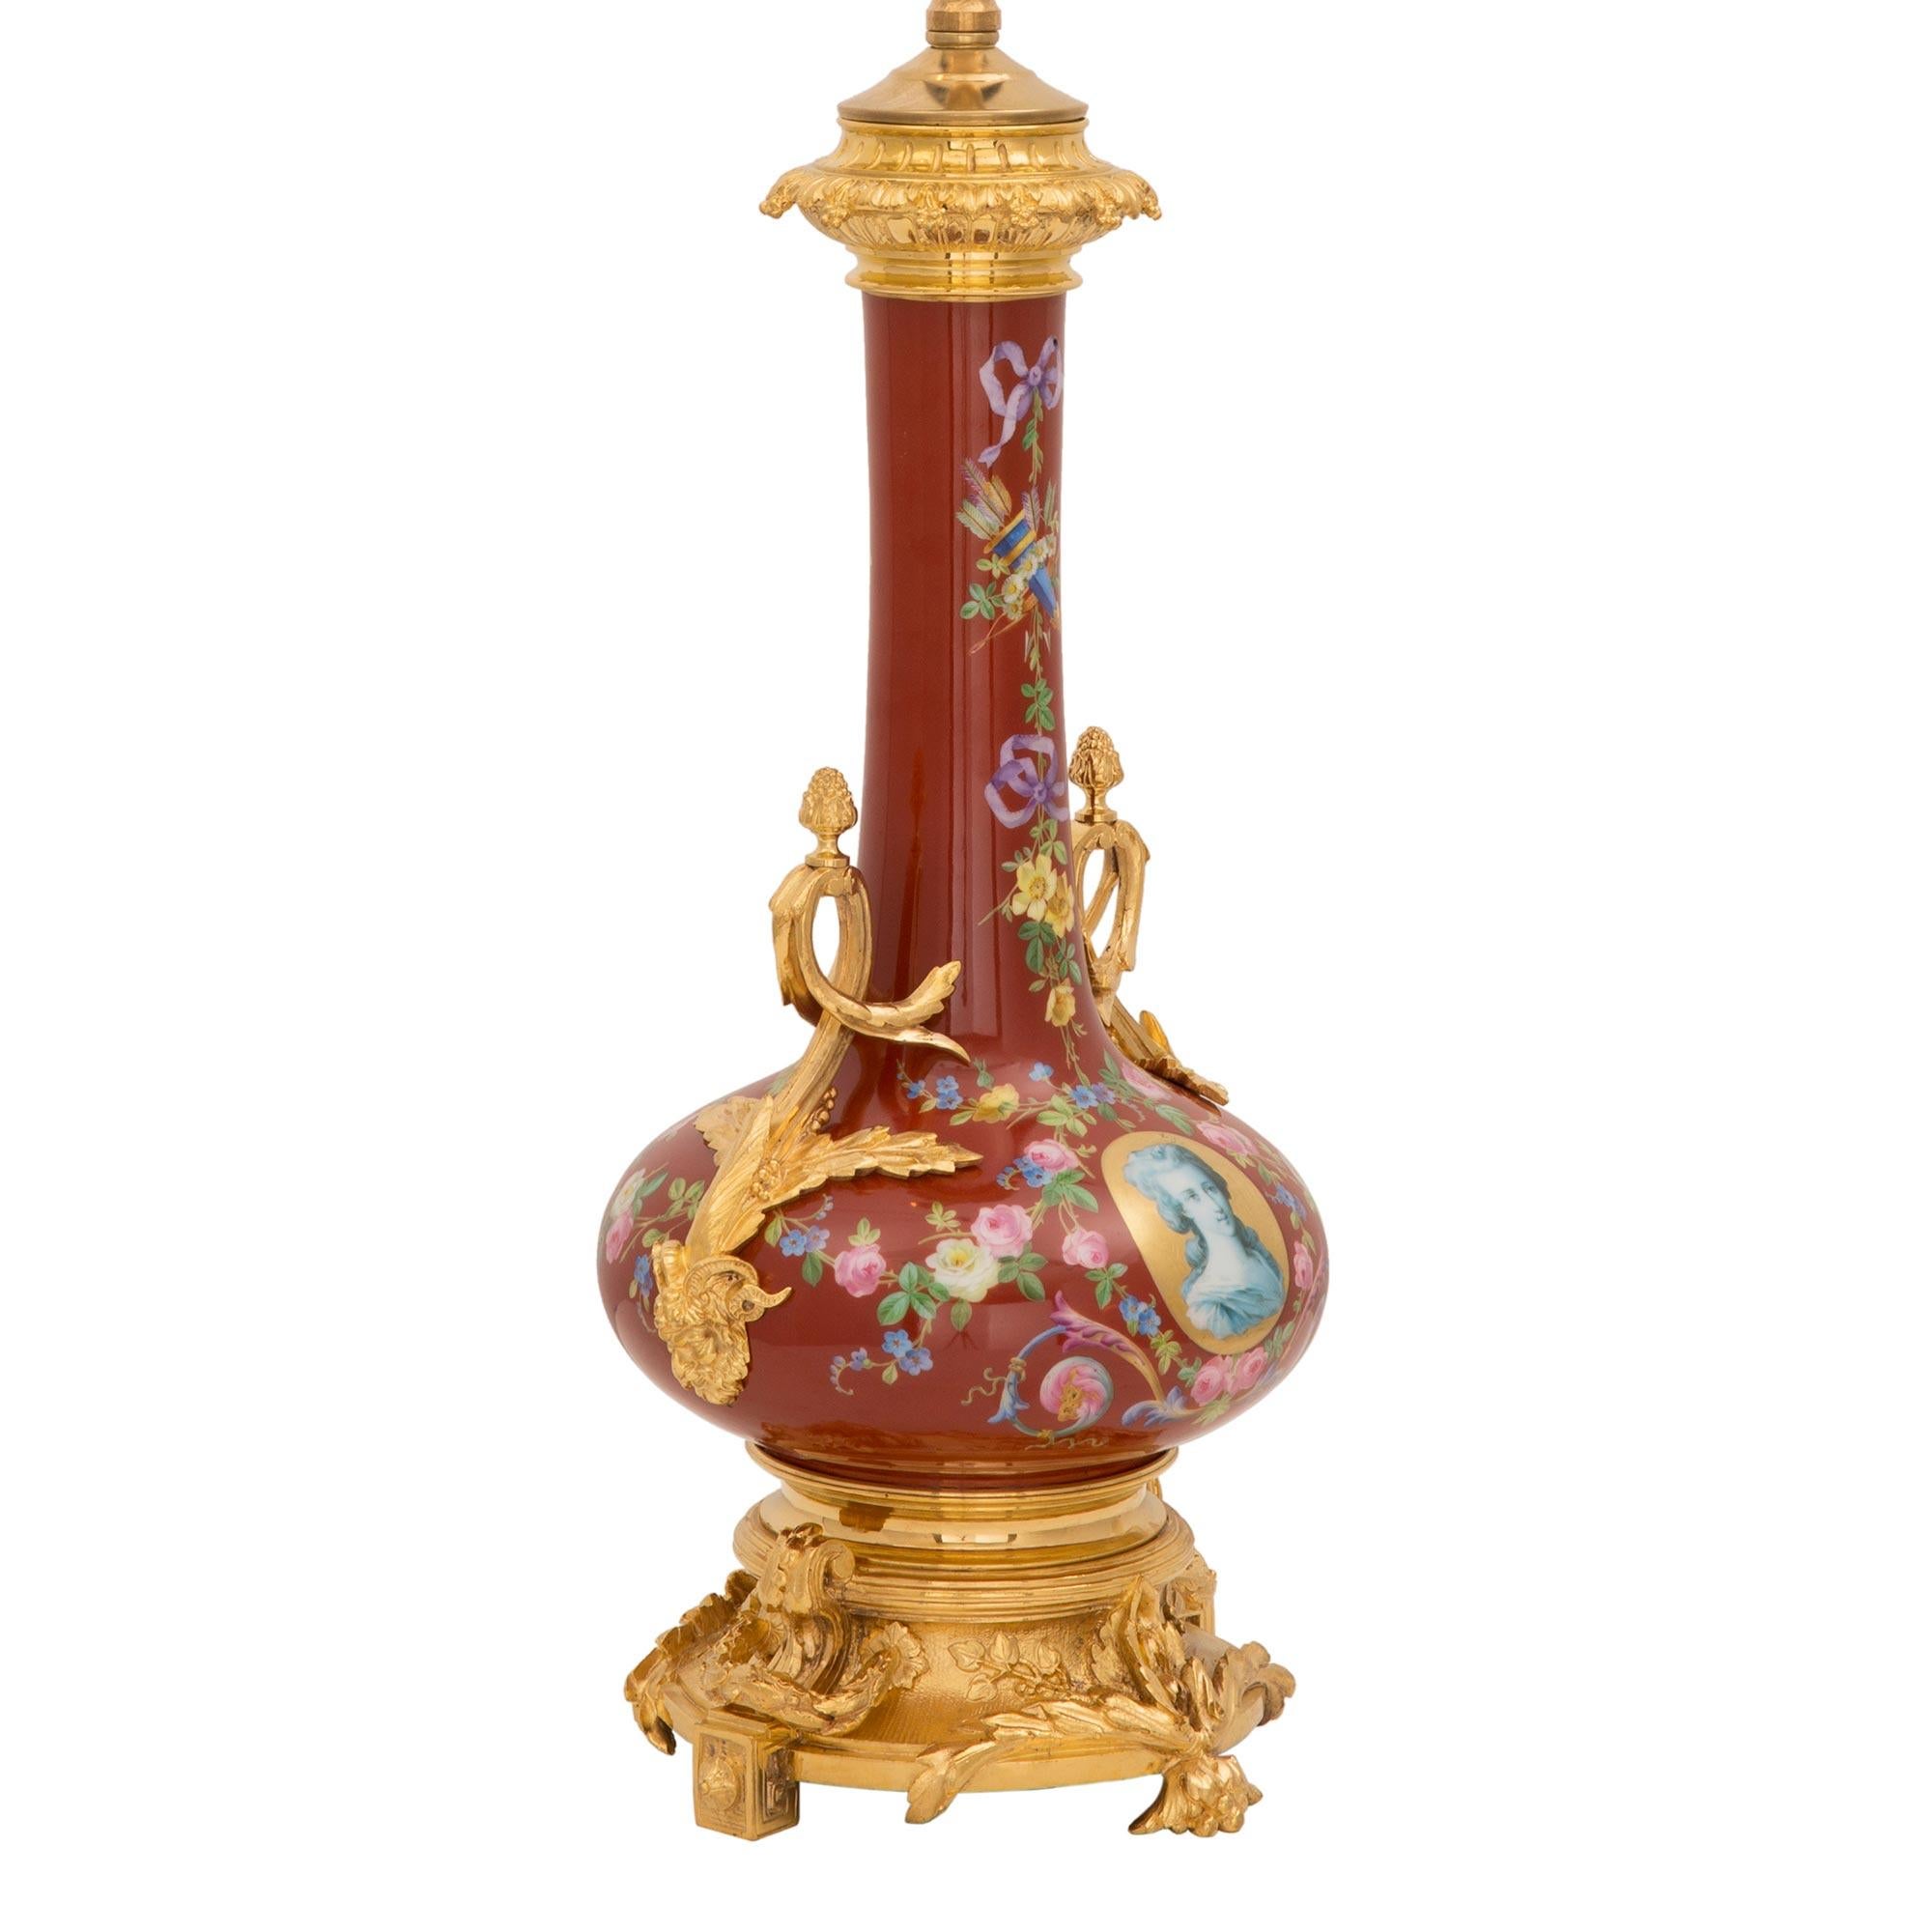 A beautiful French 19th century Louis XV st. porcelain and ormolu lamp. The lamp is raised by a striking richly chased ormolu base with fine foliate designs and Greek keys in a satin and burnished finish. The elegantly shaped porcelain body displays